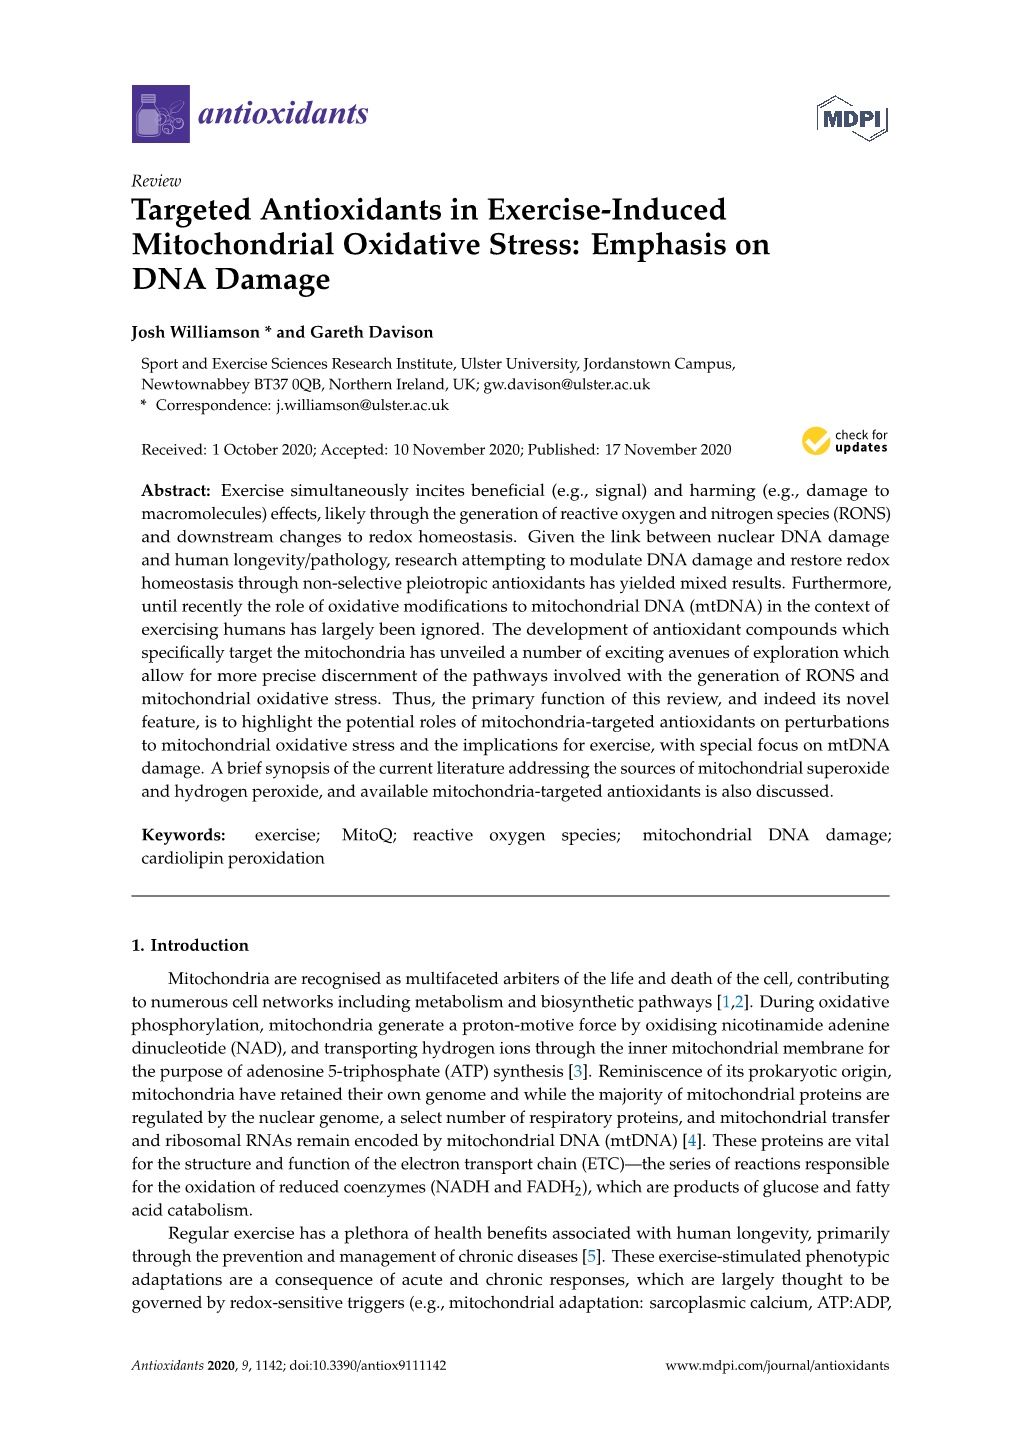 Targeted Antioxidants in Exercise-Induced Mitochondrial Oxidative Stress: Emphasis on DNA Damage